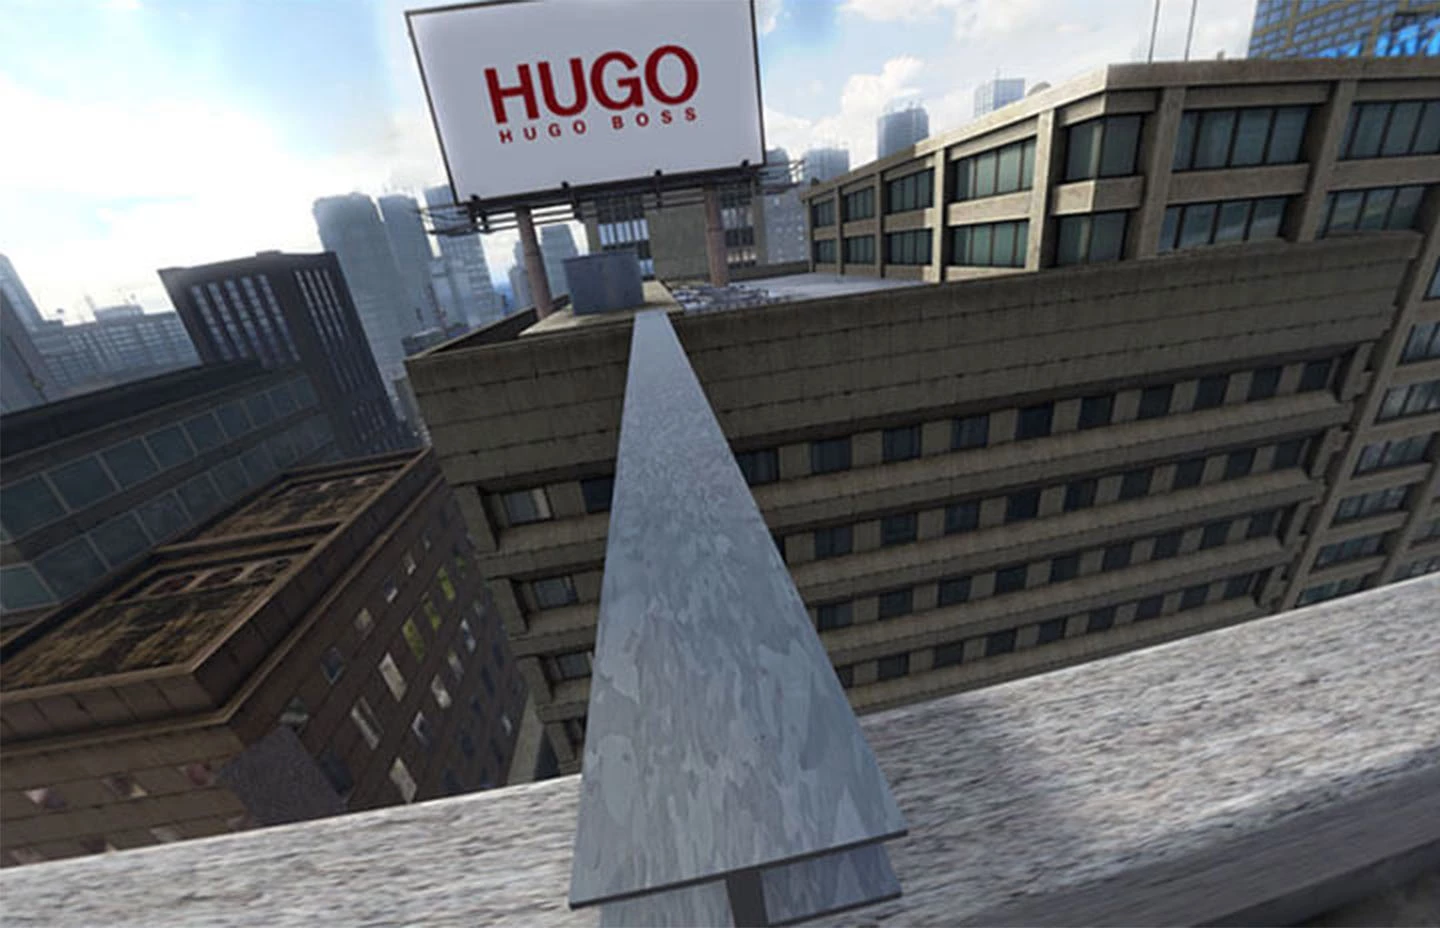 First person view of walking across a beam between skyscraper buildings - Hugo Boss billboard in the background